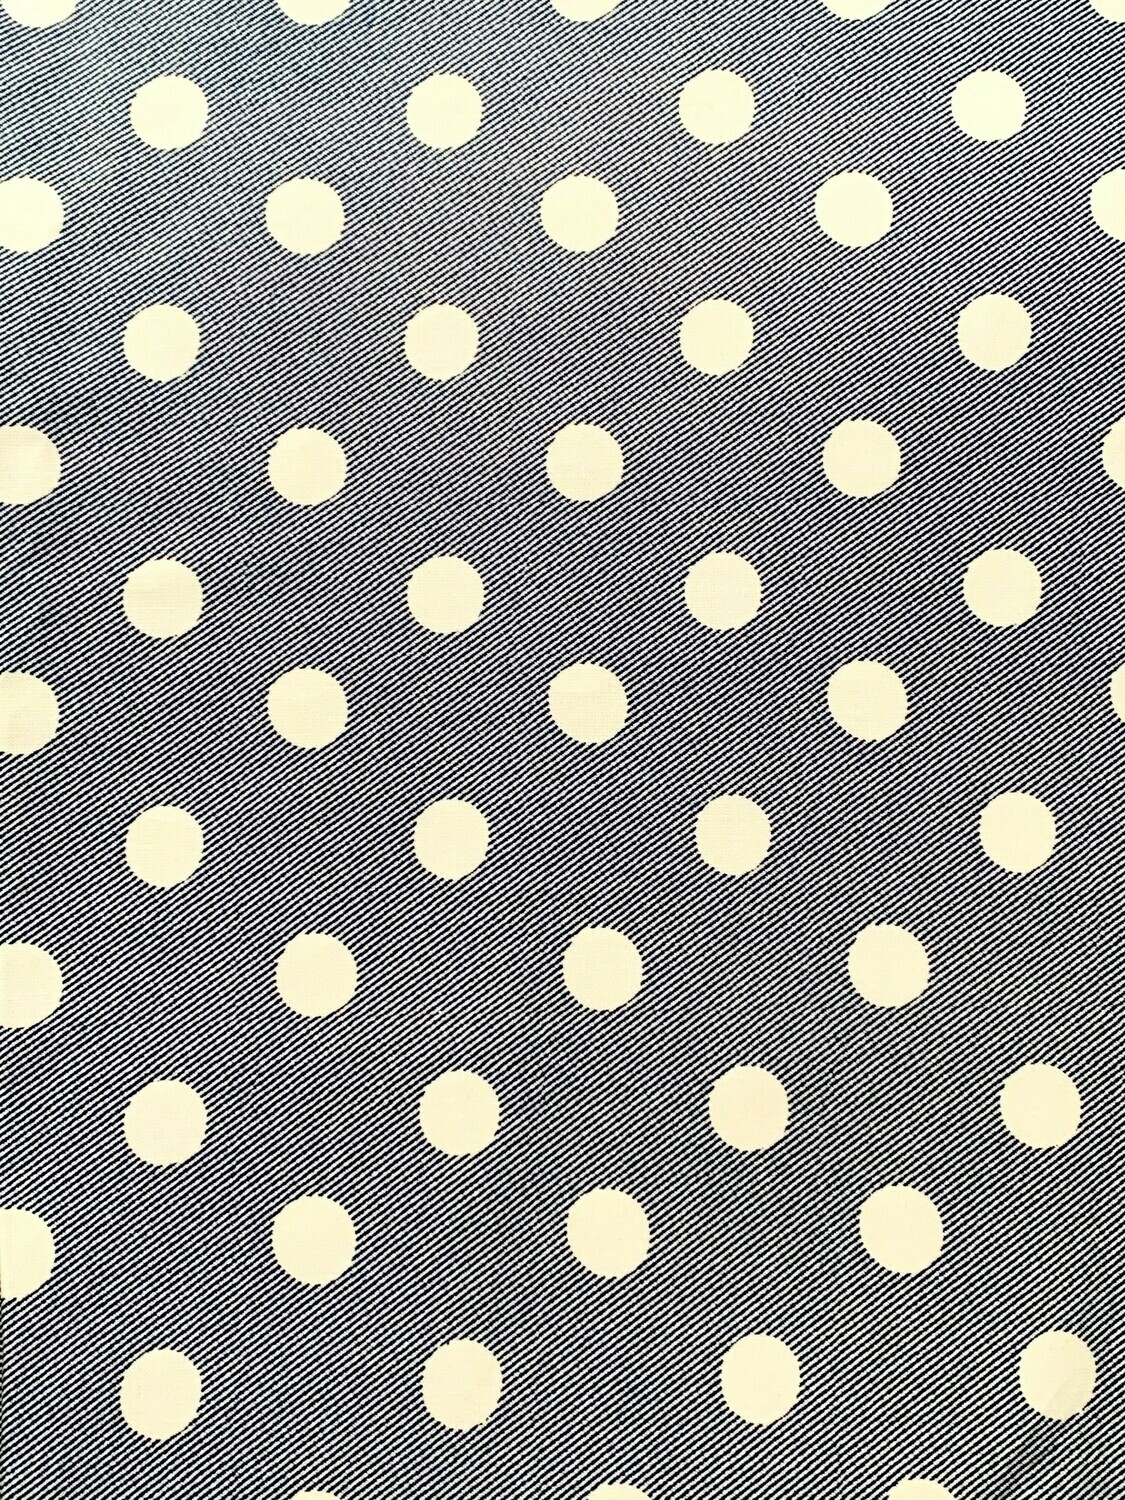 Large Polka, Striped Navy | Cotton Woven | 150cm wide